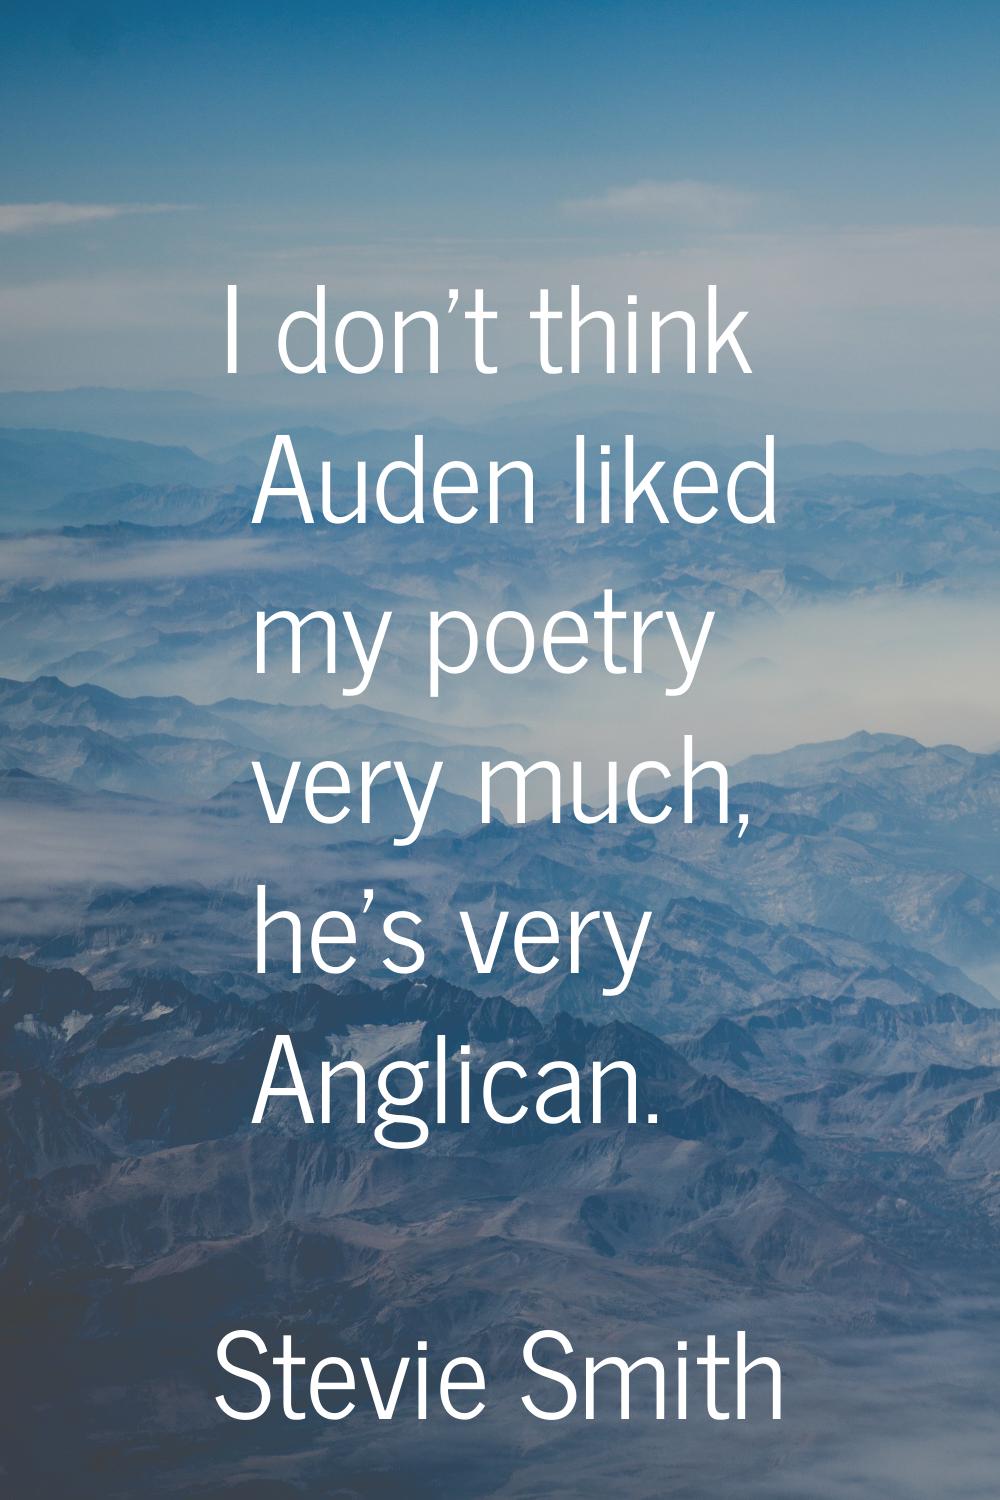 I don't think Auden liked my poetry very much, he's very Anglican.